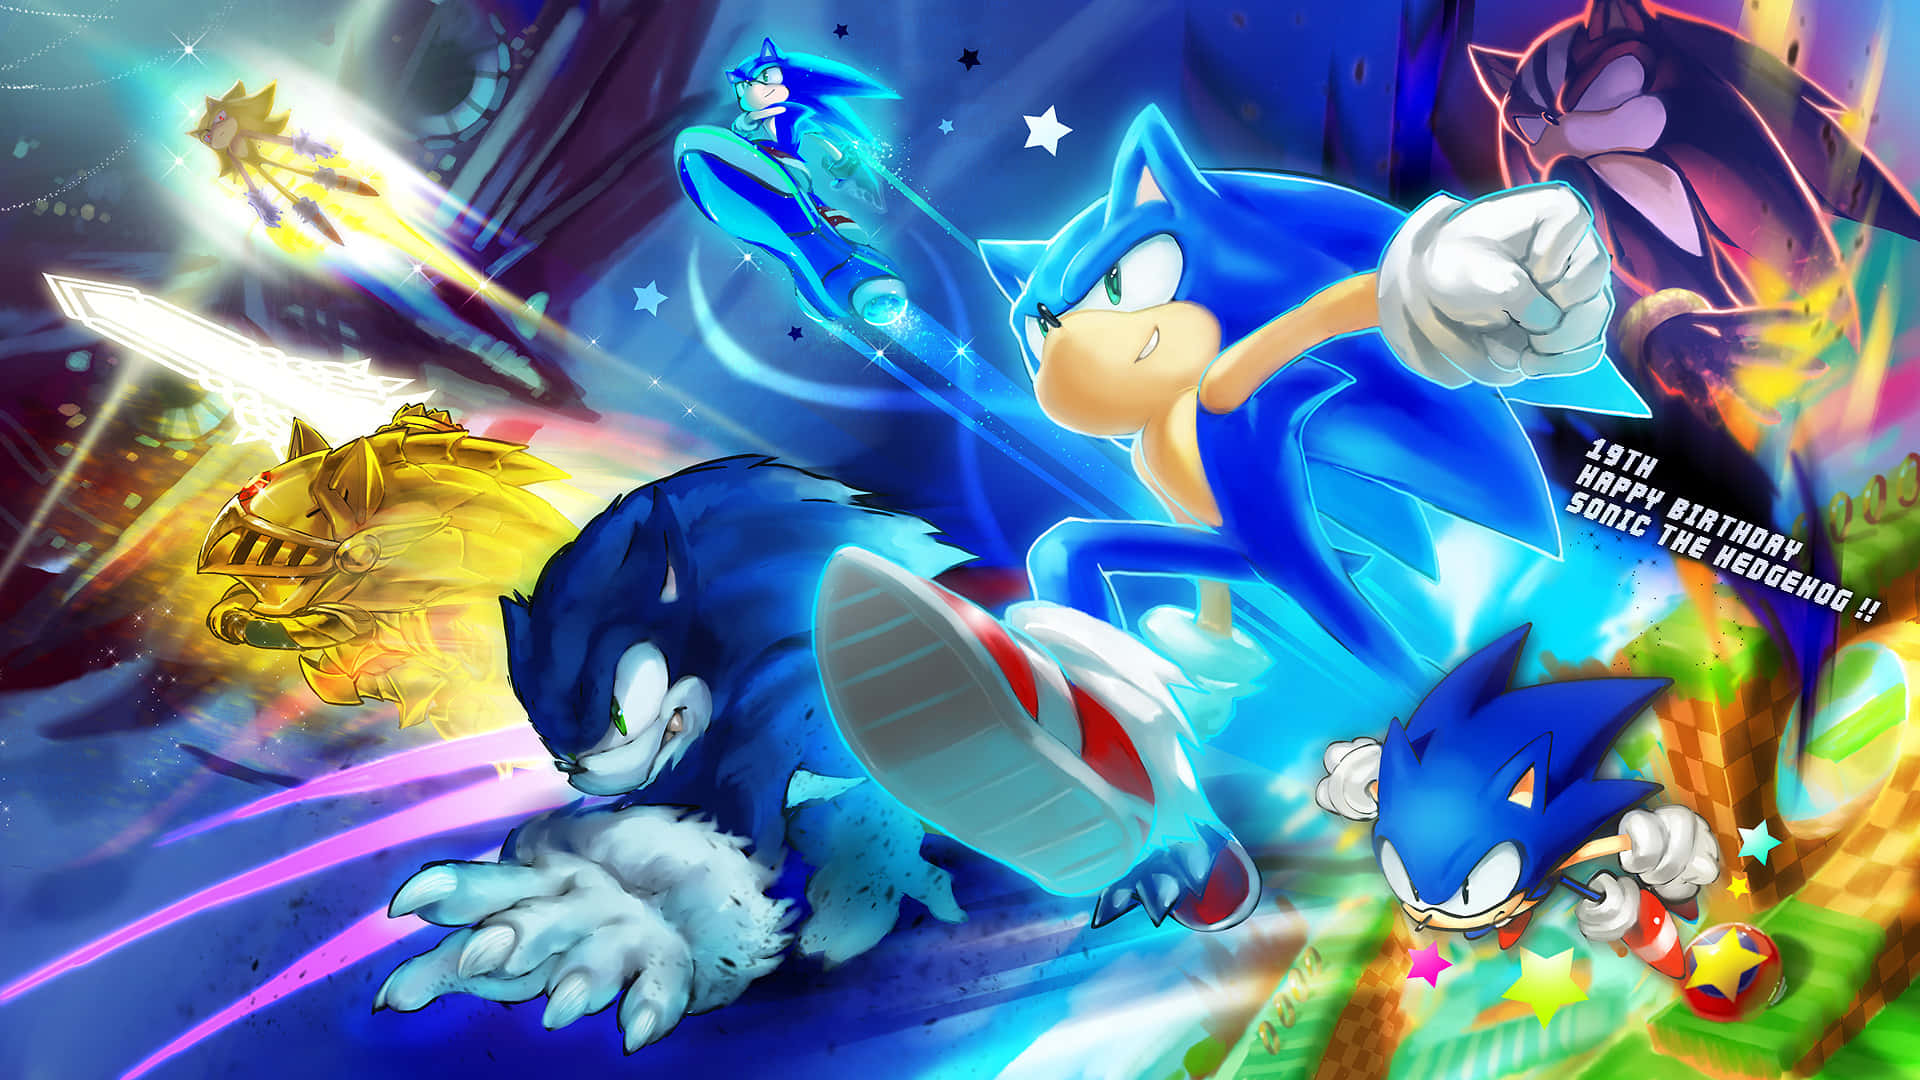 Sonic racing through a mystical world in Sonic and the Secret Rings Wallpaper